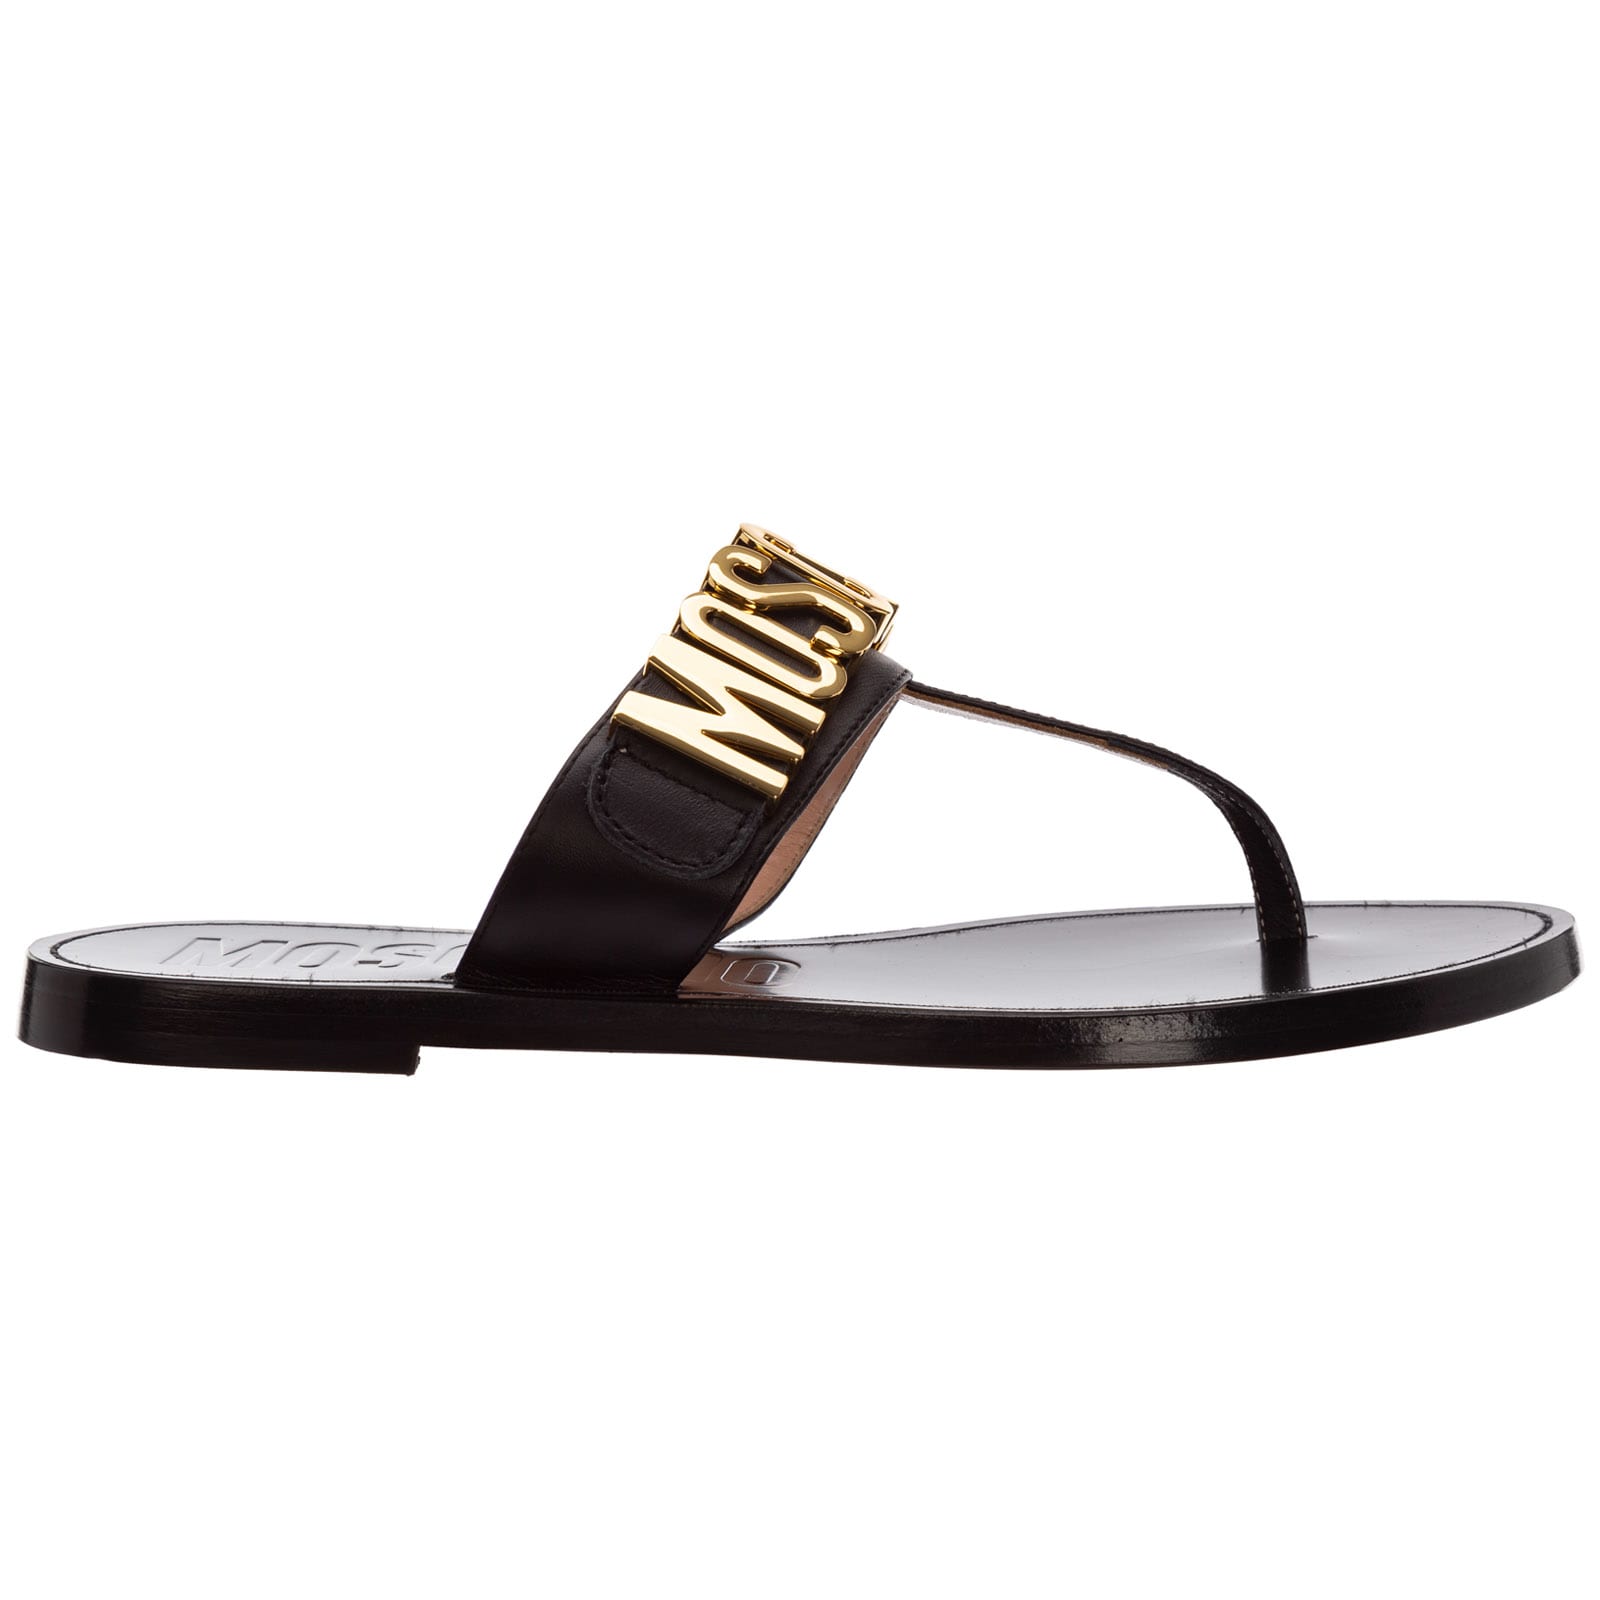 Buy Moschino K/ikonik T-bar Sandals online, shop Moschino shoes with free shipping